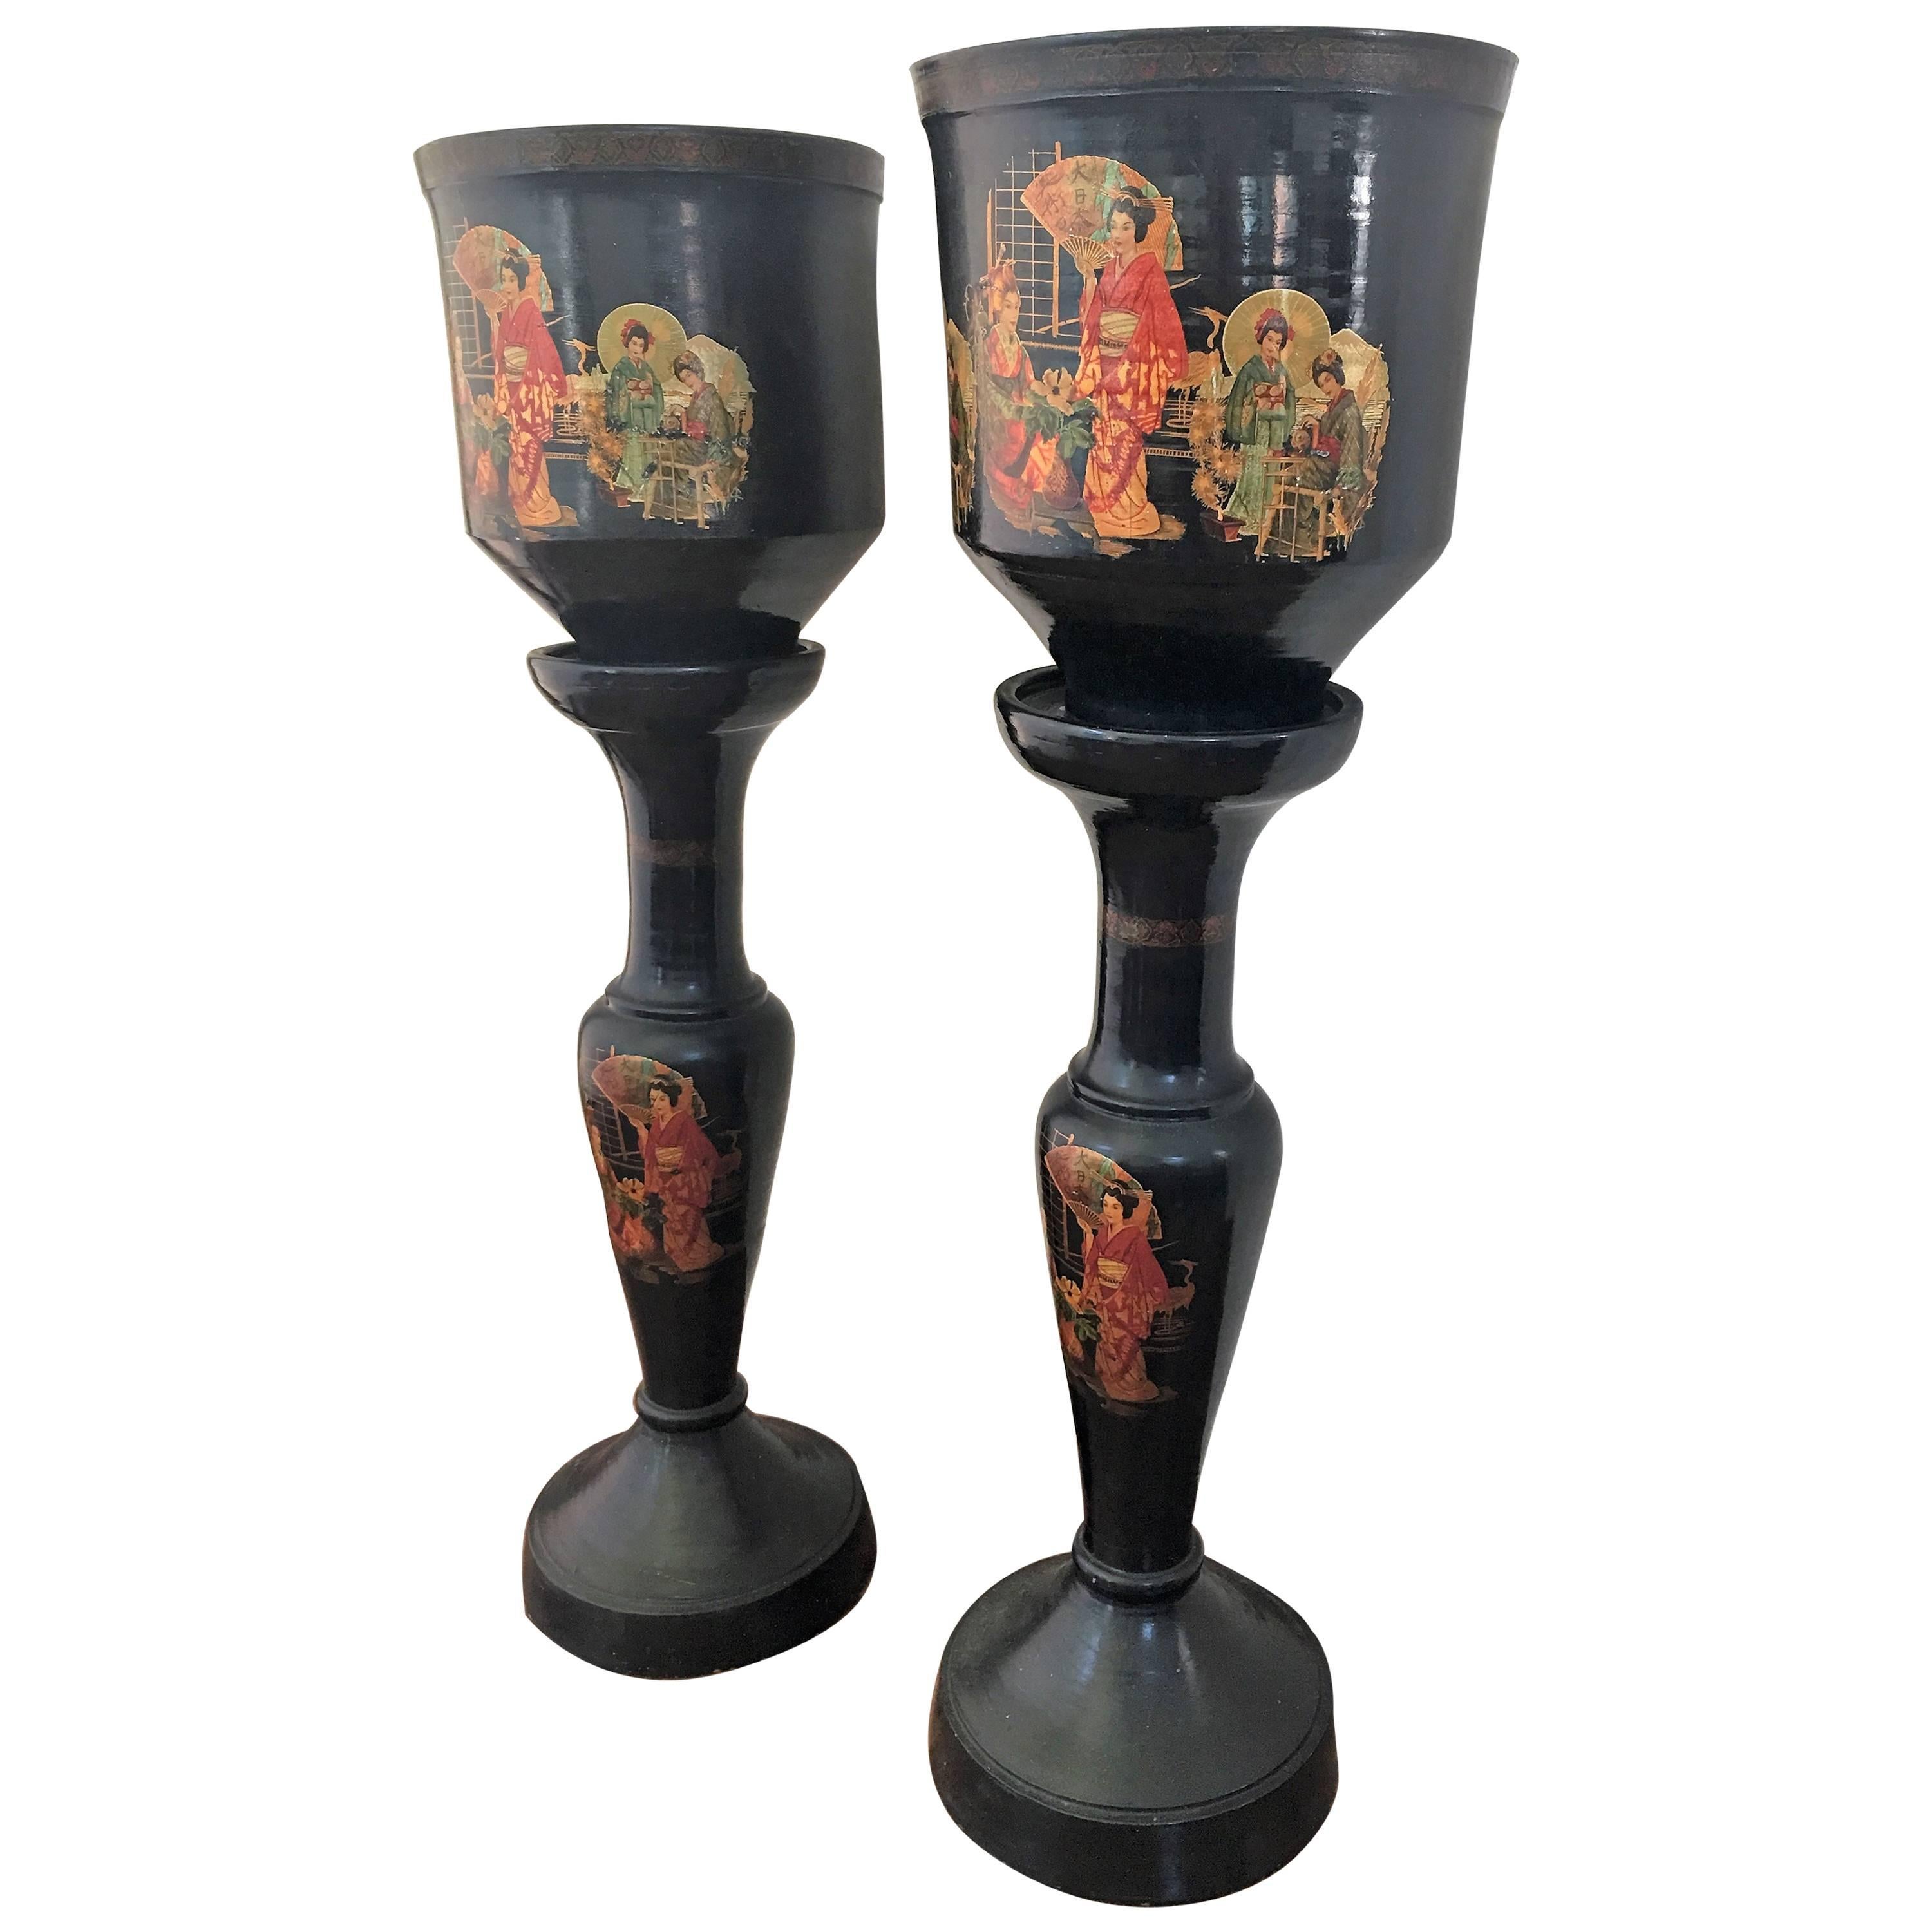 Pair of Large Chinoiserie Style Urns or Vases on Pedestals of Glazed Terracotta For Sale